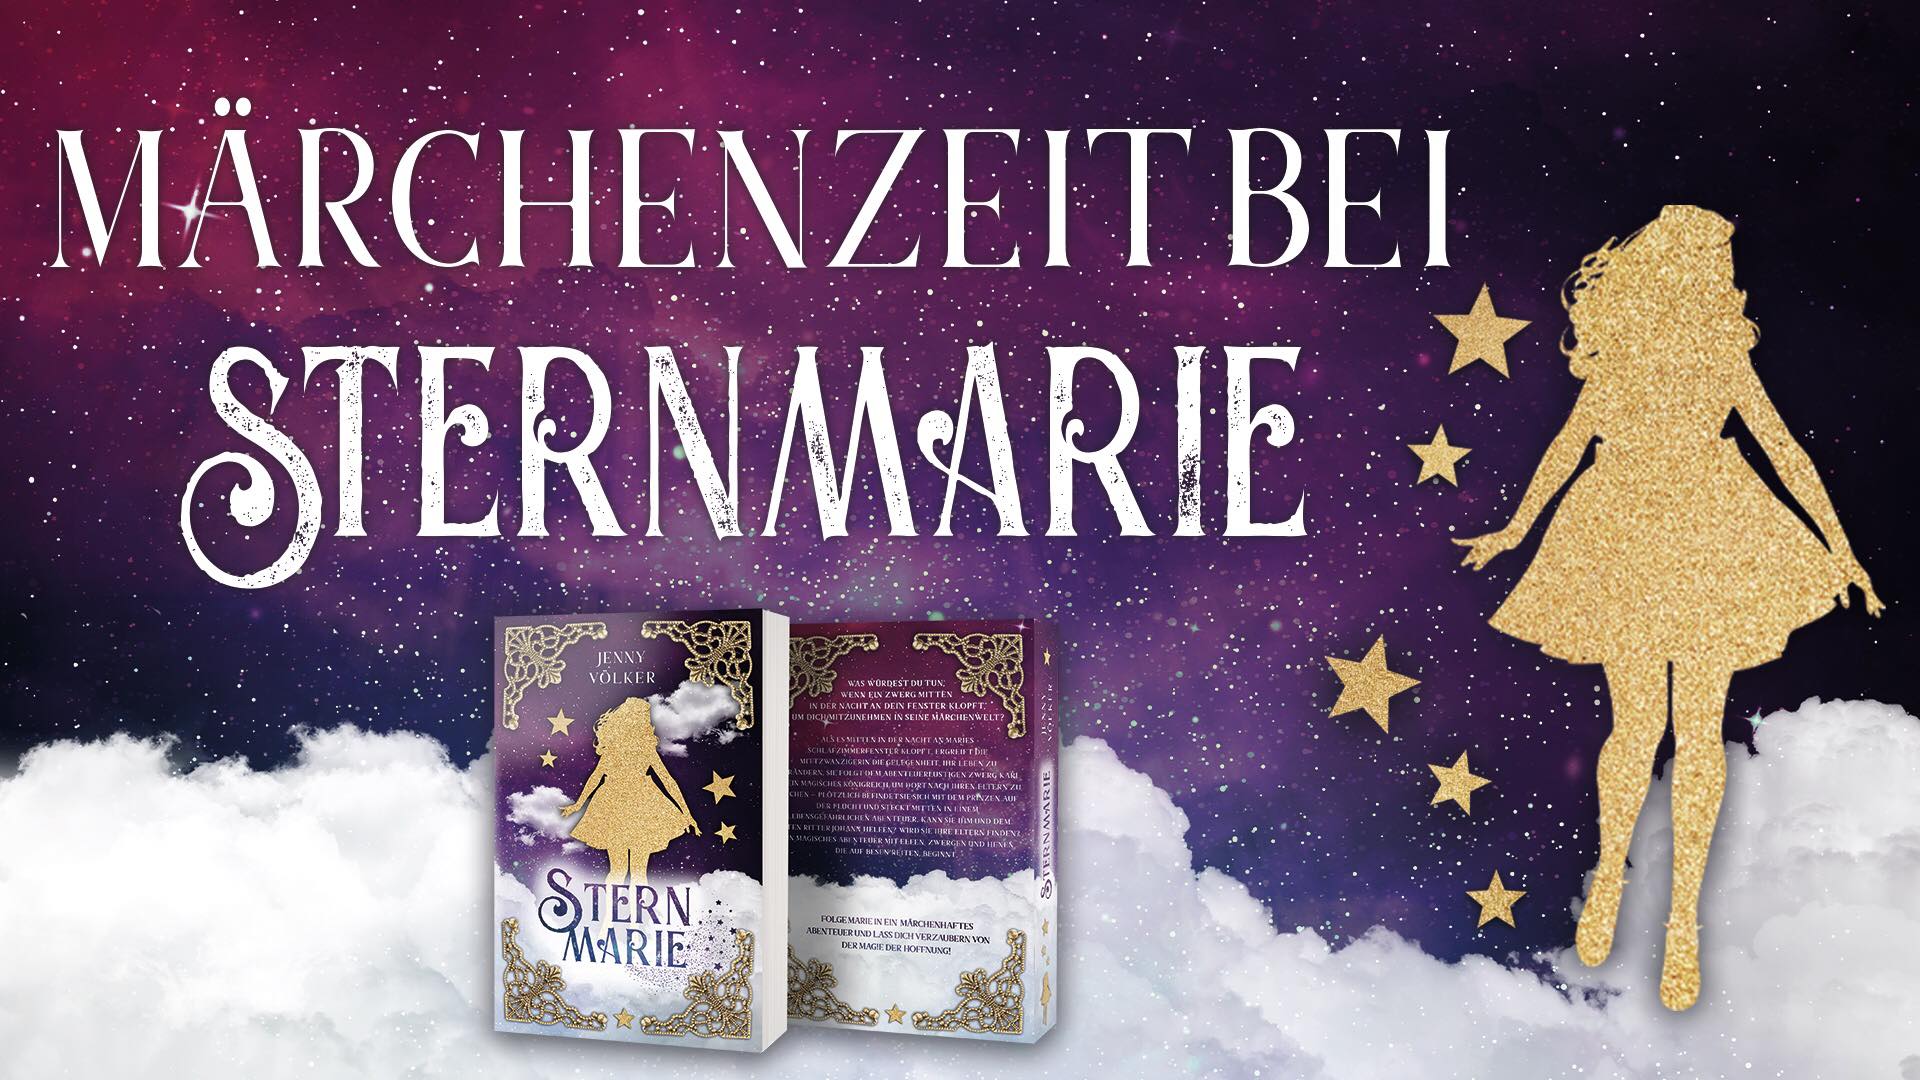 You are currently viewing Märchenzeit bei „Sternmarie“